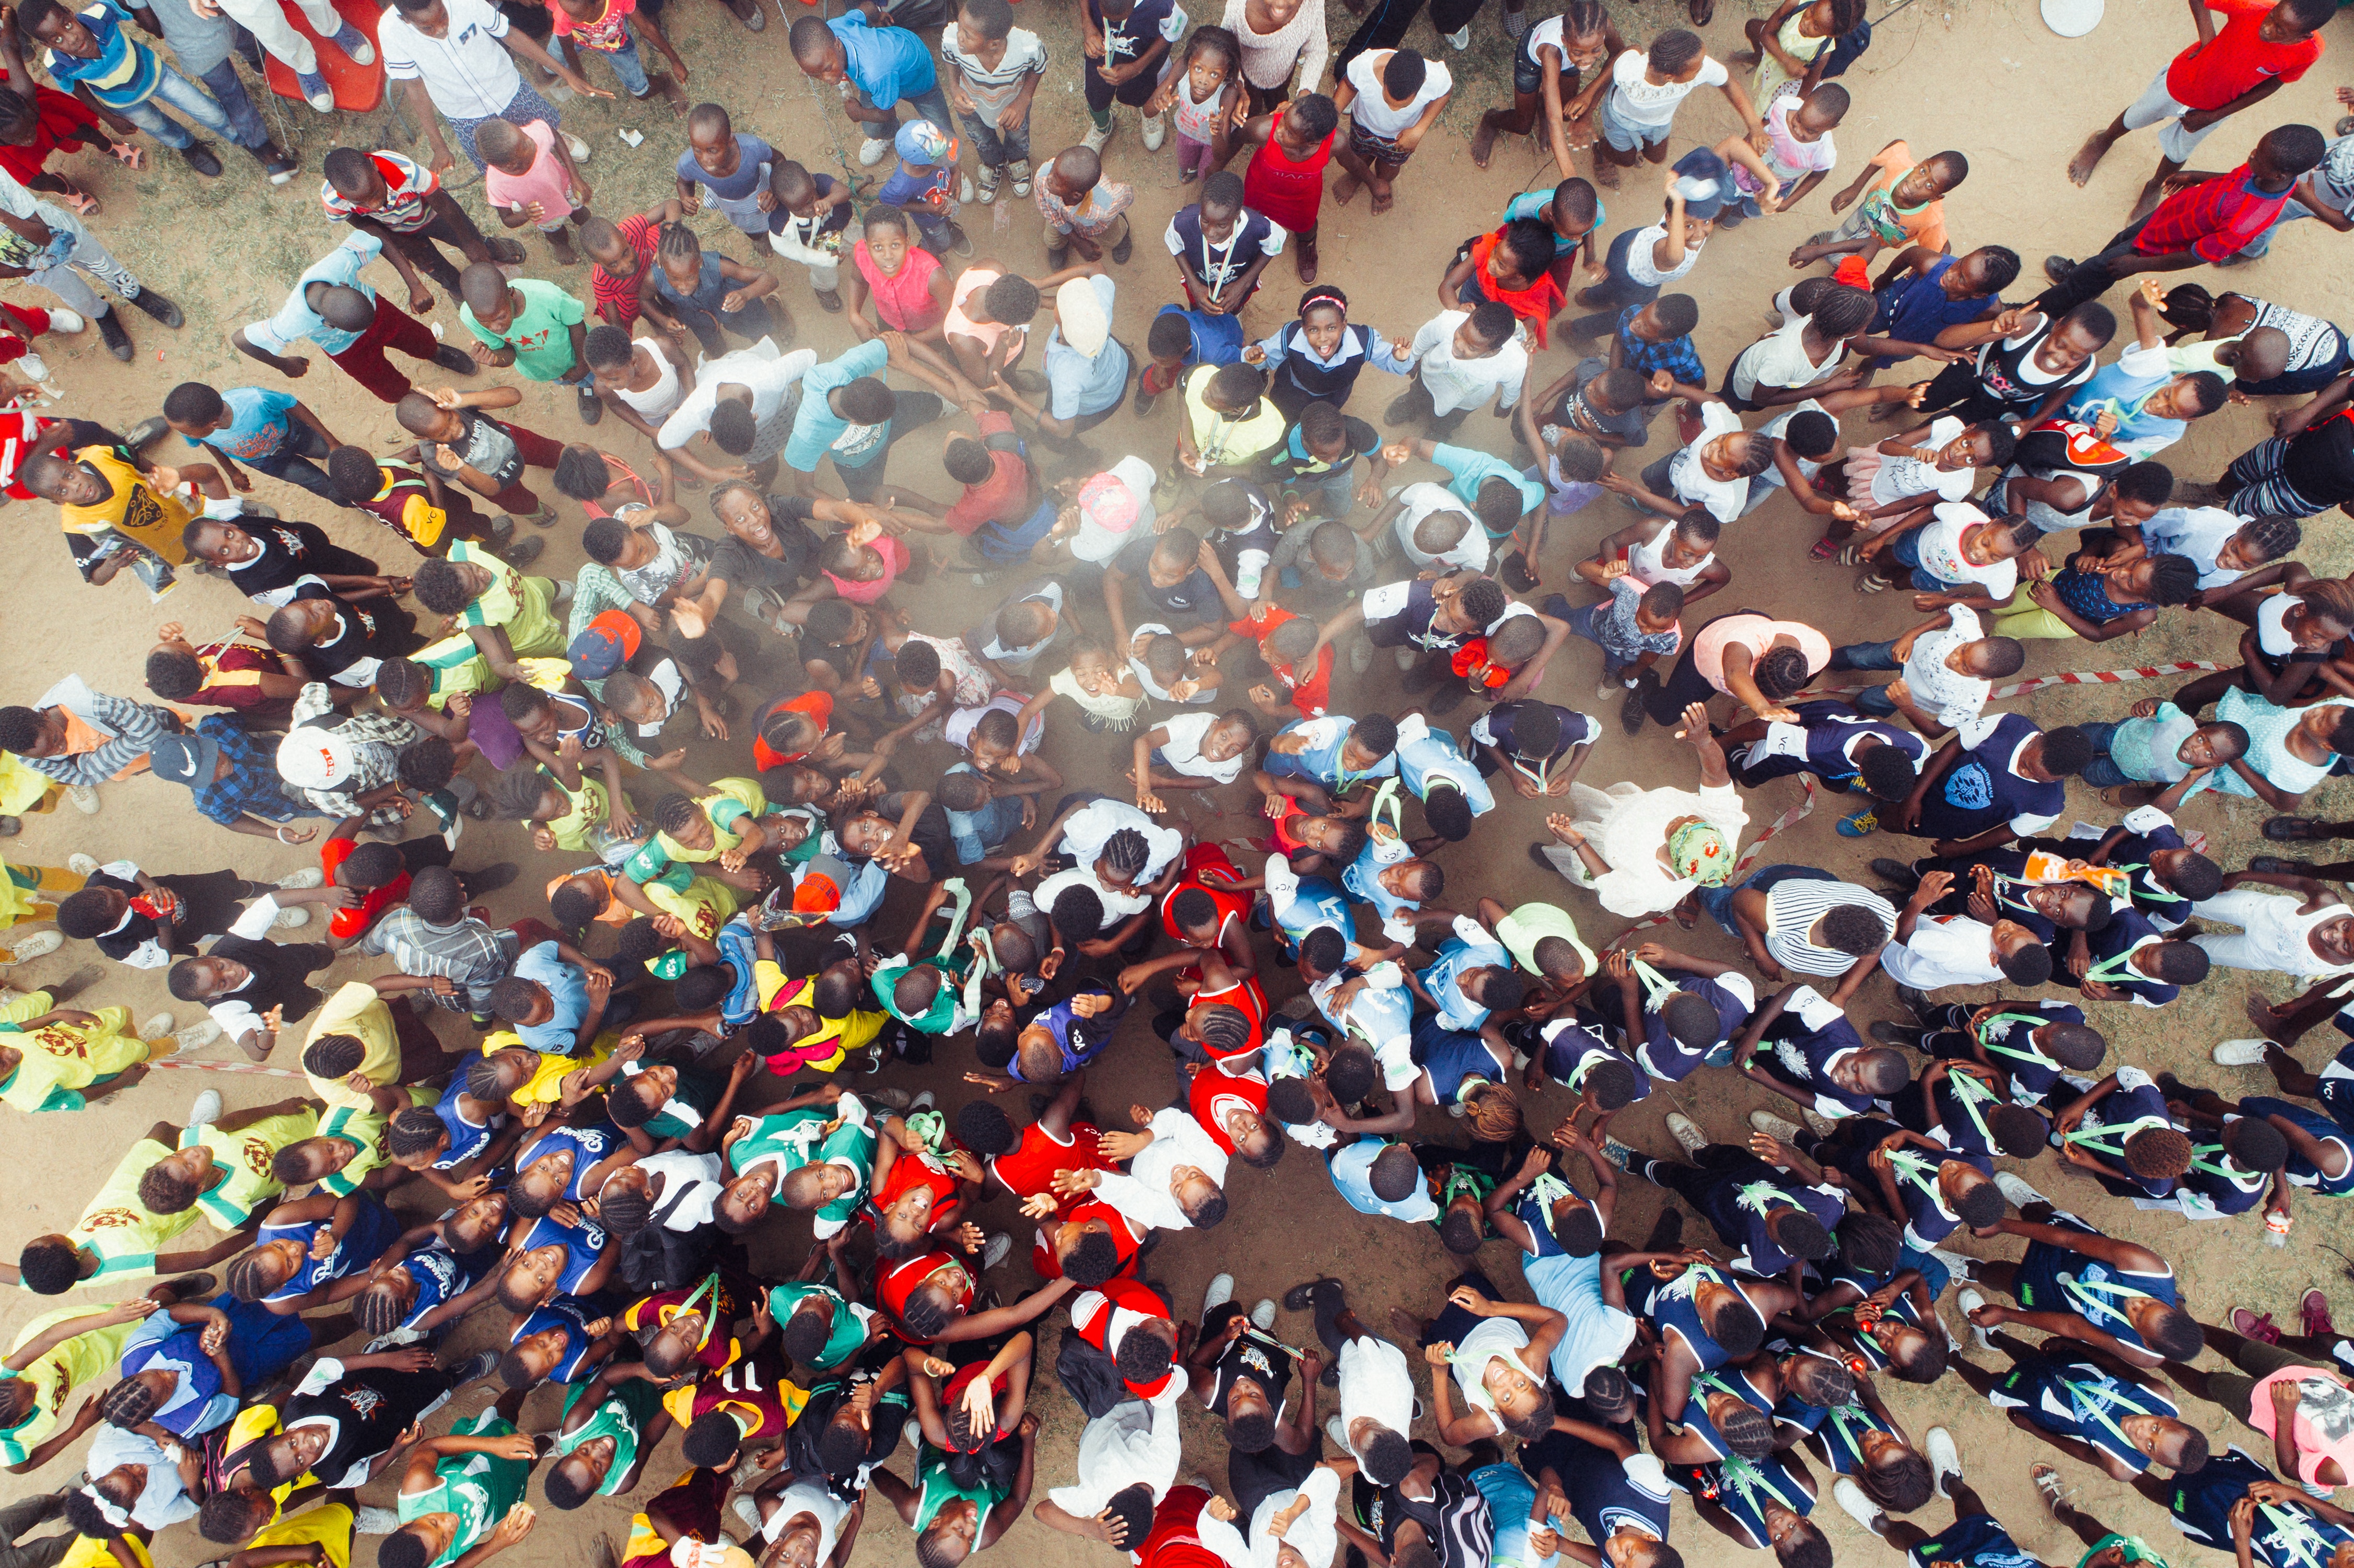 Crowd from above in Africa